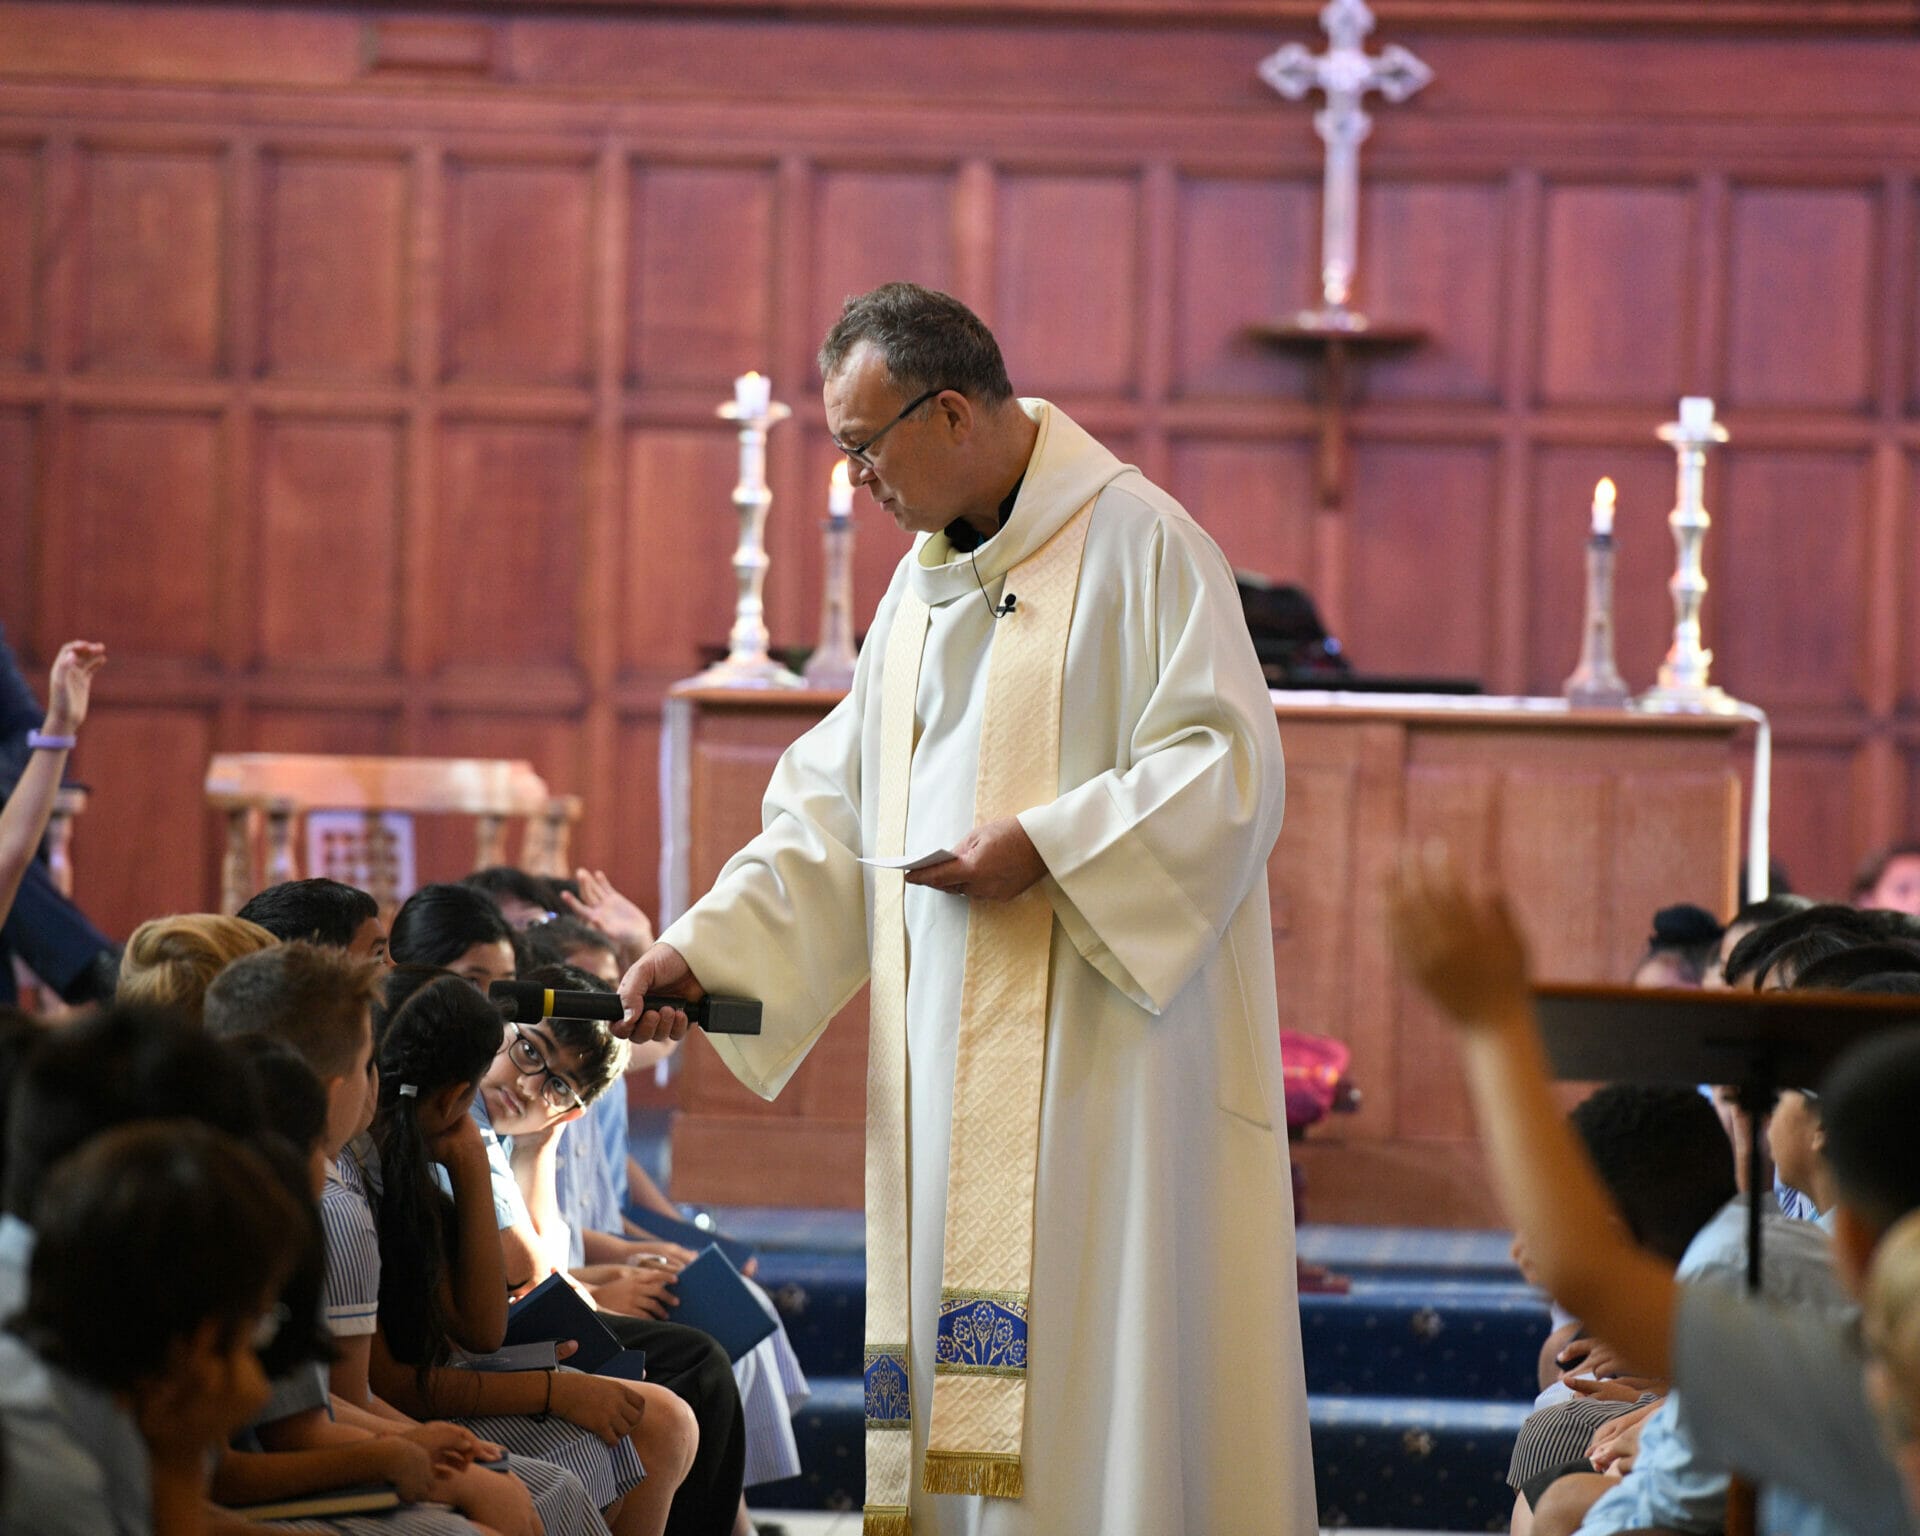 Father Andrew speaks to pupils during a Chapel service.